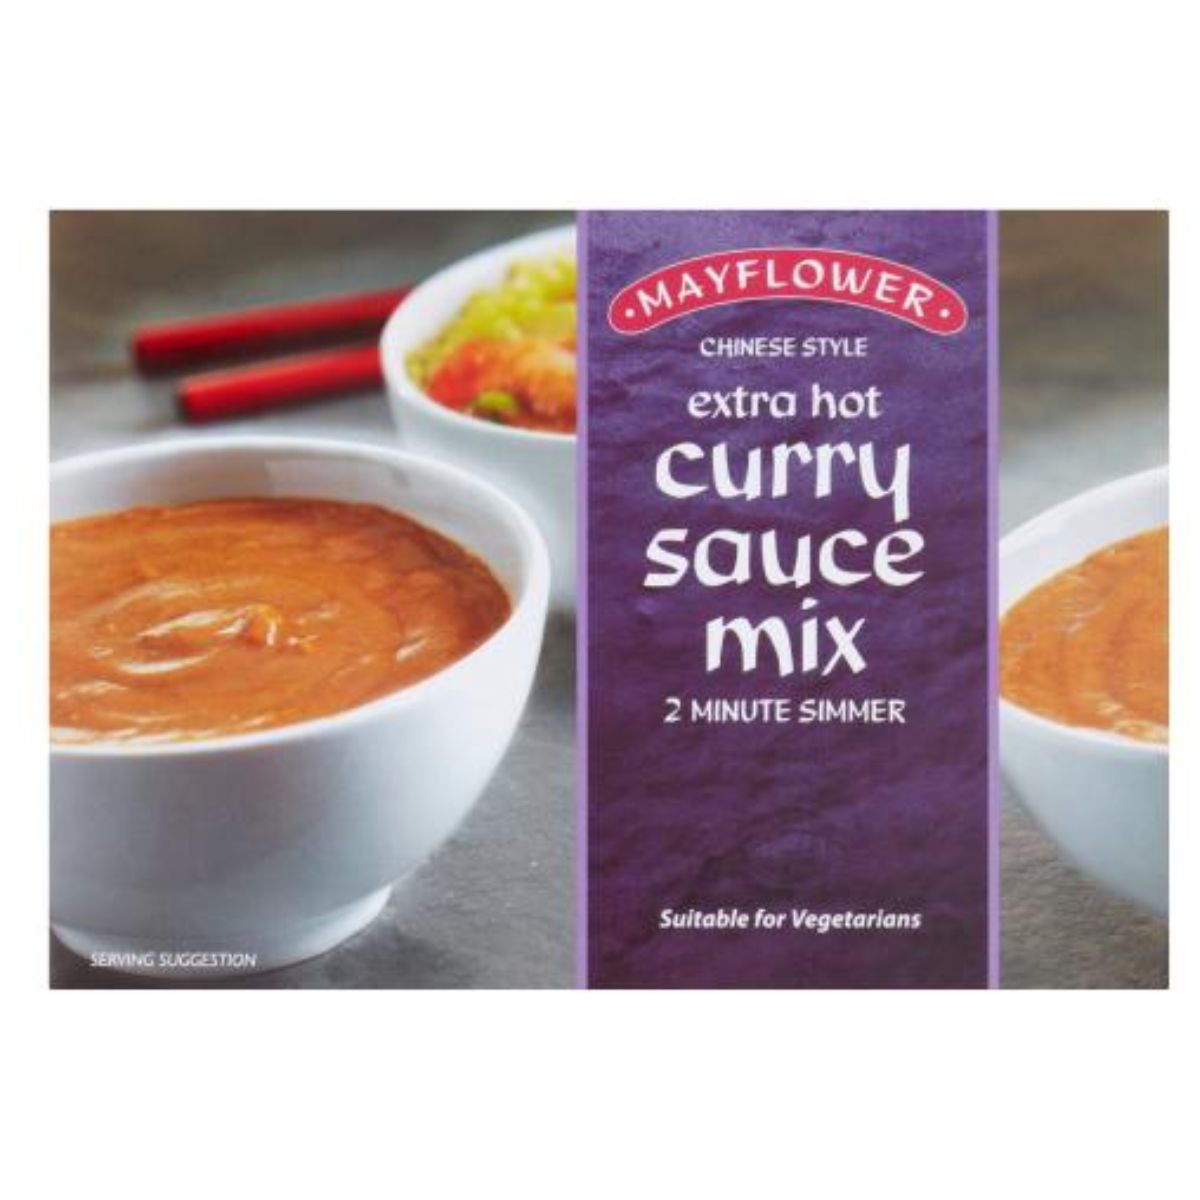 A packet of Mayflower - Chinese Style Extra Hot Curry Sauce Mix - 255g with serving suggestion images of the prepared sauce in bowls.